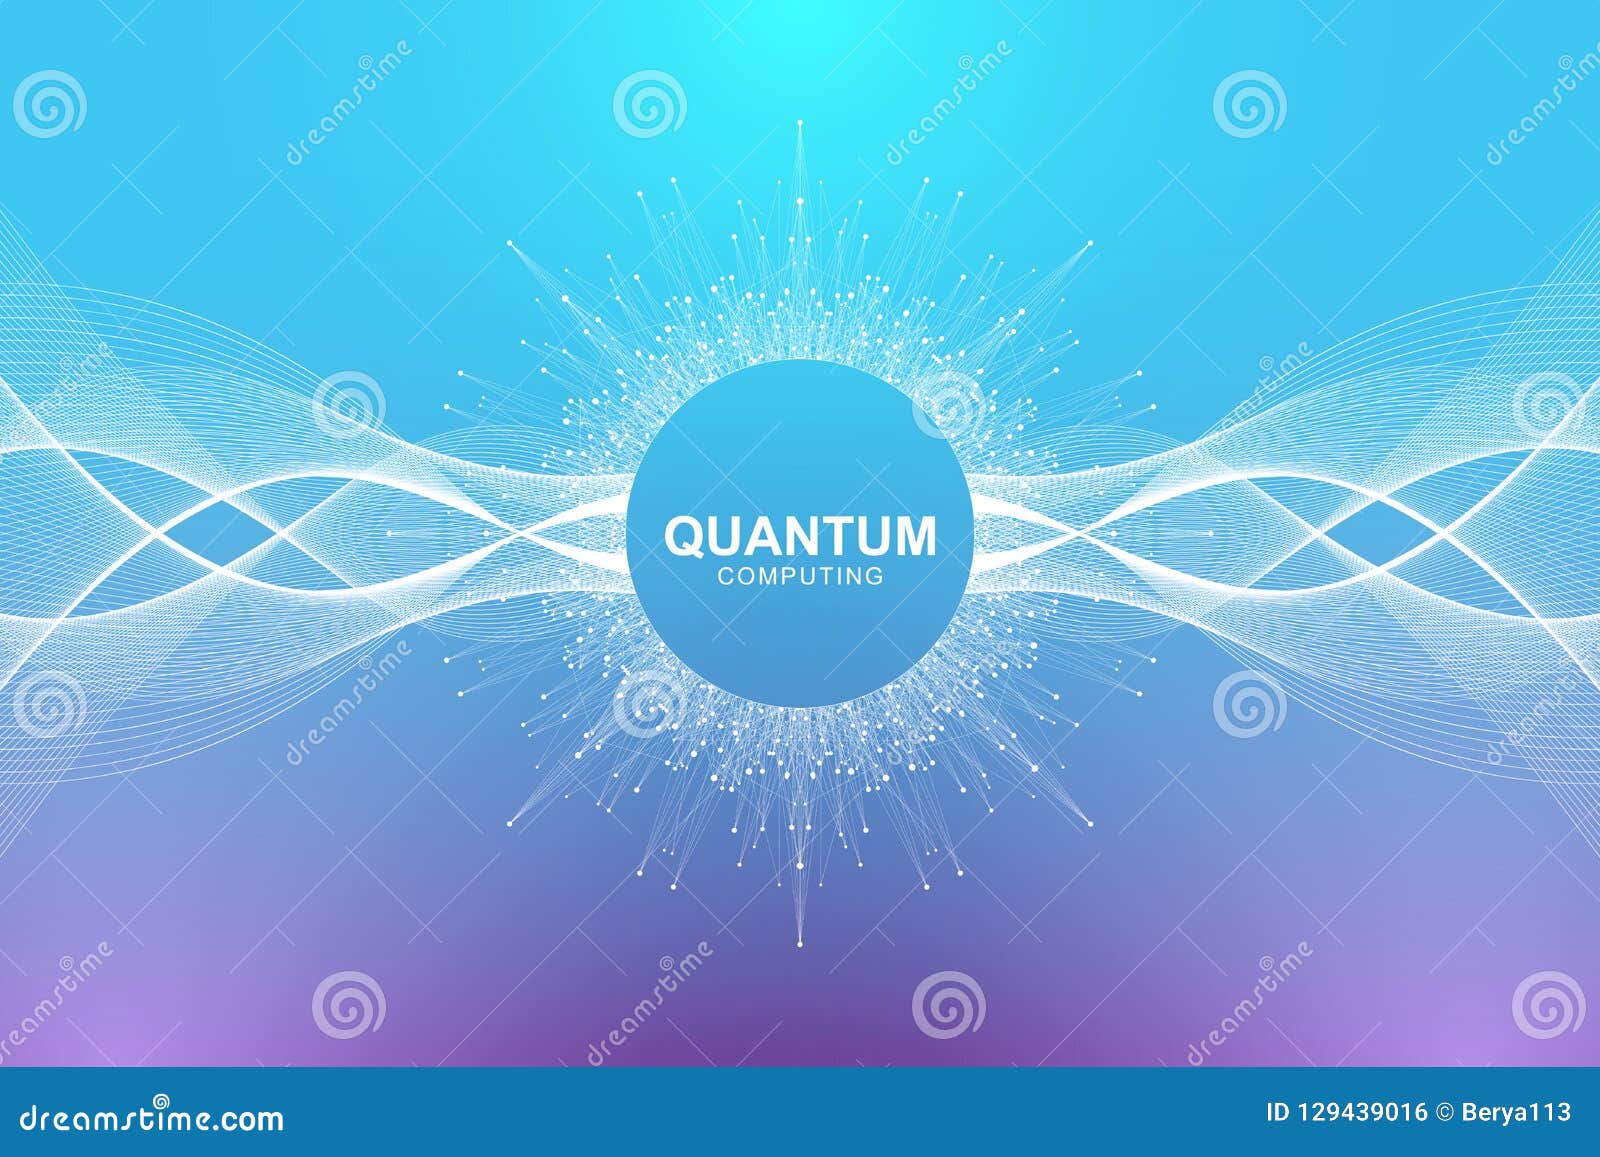 quantum computer technology concept. deep learning artificial intelligence. big data algorithms visualization for